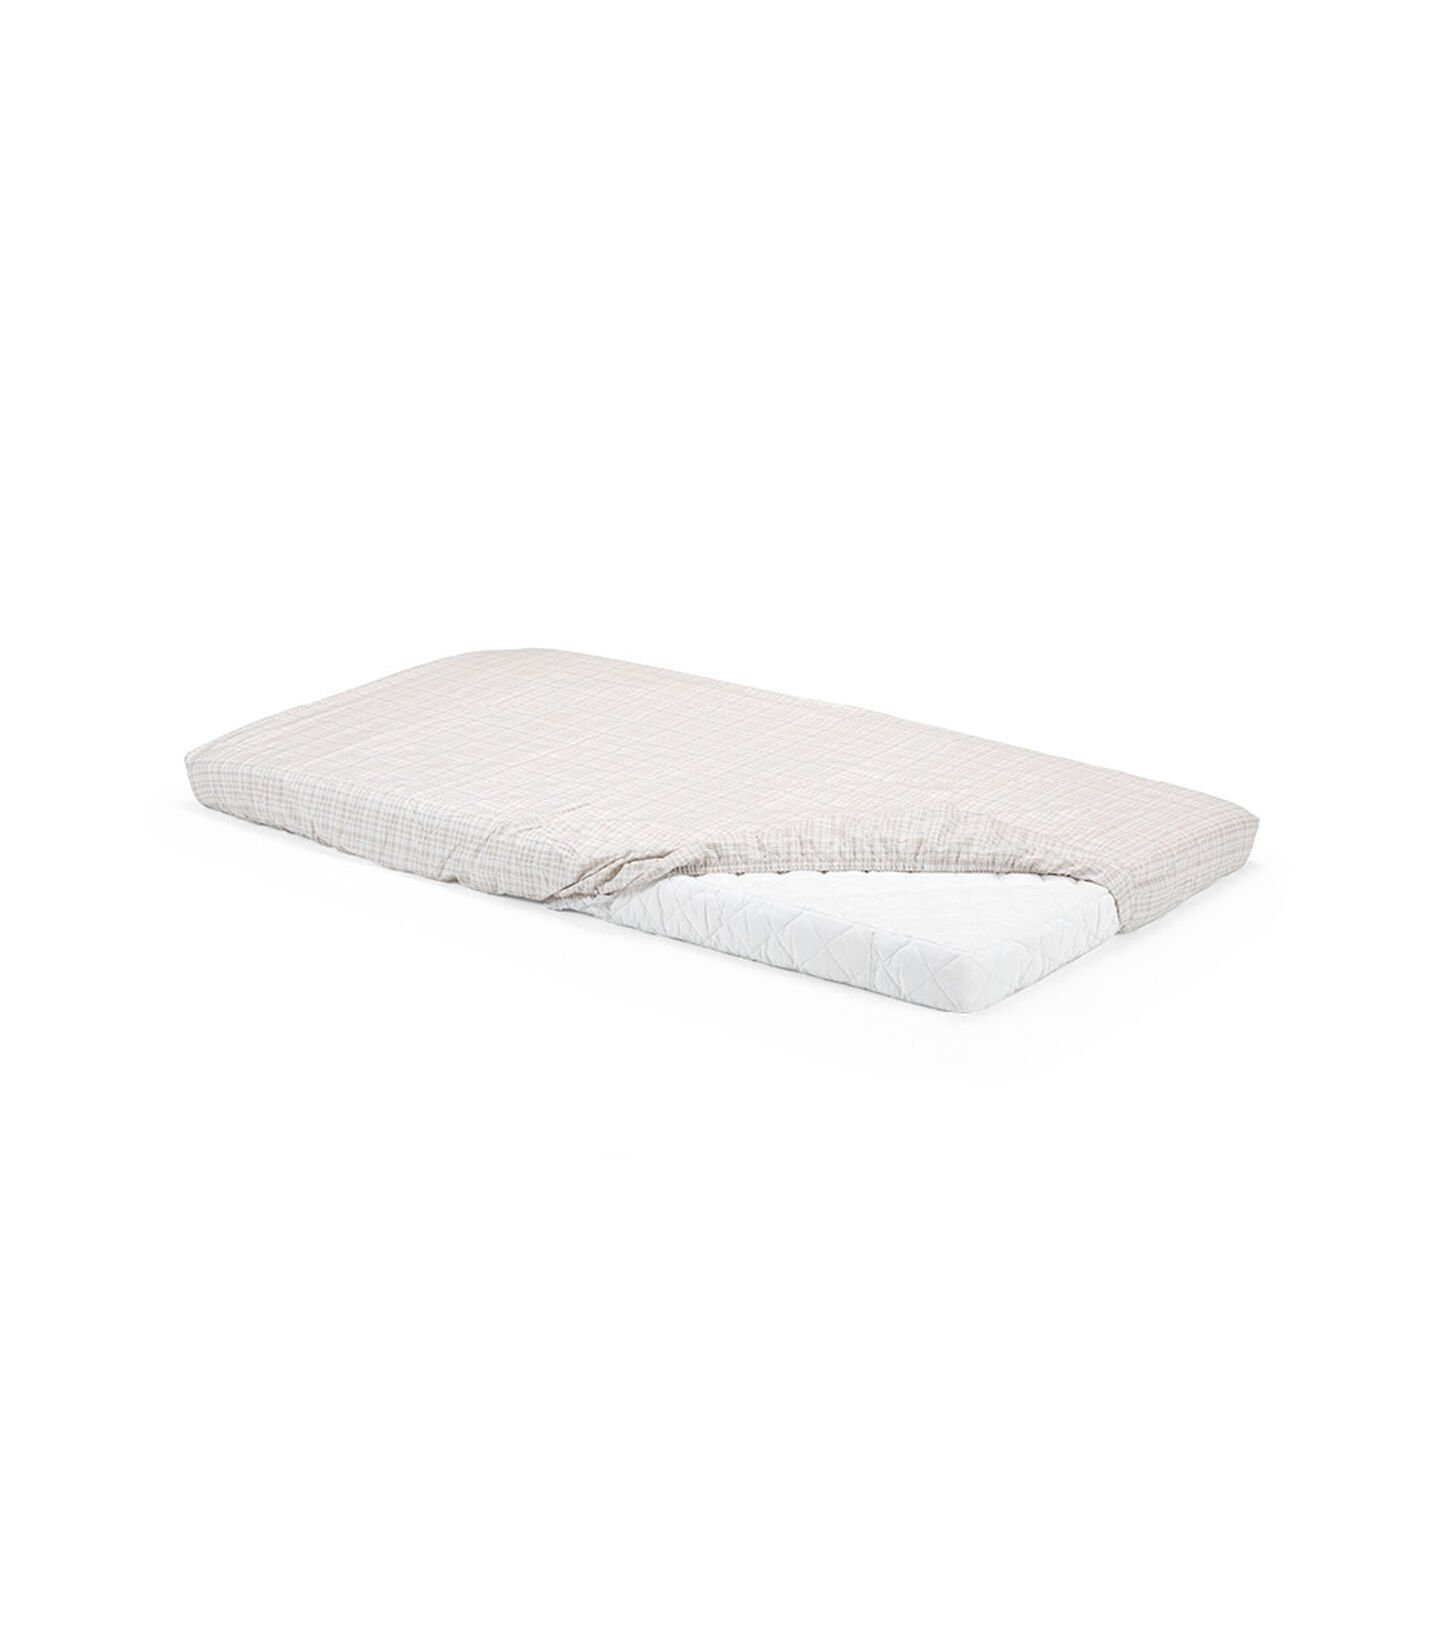 Stokke® Home™ Mattress. Fitted Sheet Beige Checks, Sold separately. view 1